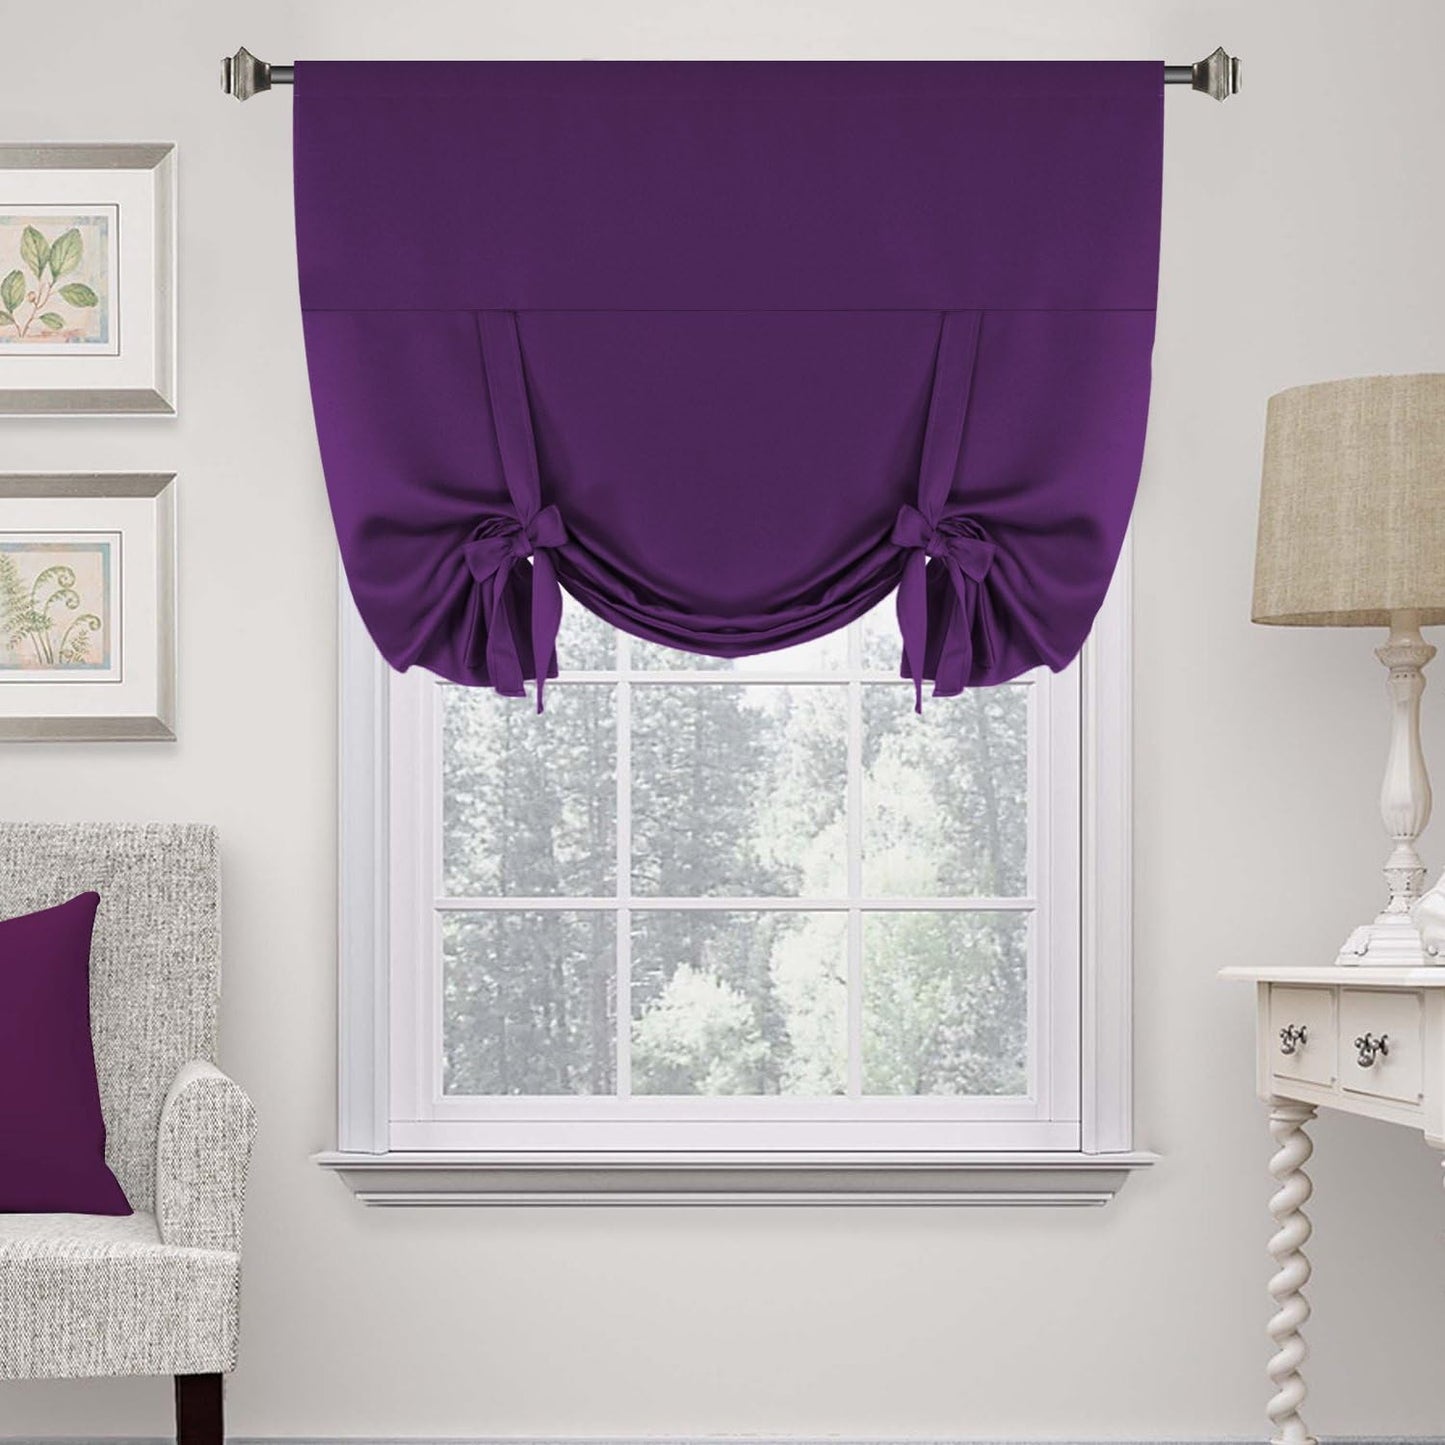 H.VERSAILTEX Tie up Curtain Thermal Insulated Room Darkening Rod Pocket Valance for Bedroom (Coral, 1 Panel, 42 Inches W X 63 Inches L)  H.VERSAILTEX Plum Purple W42" X L63" 1-Pack 